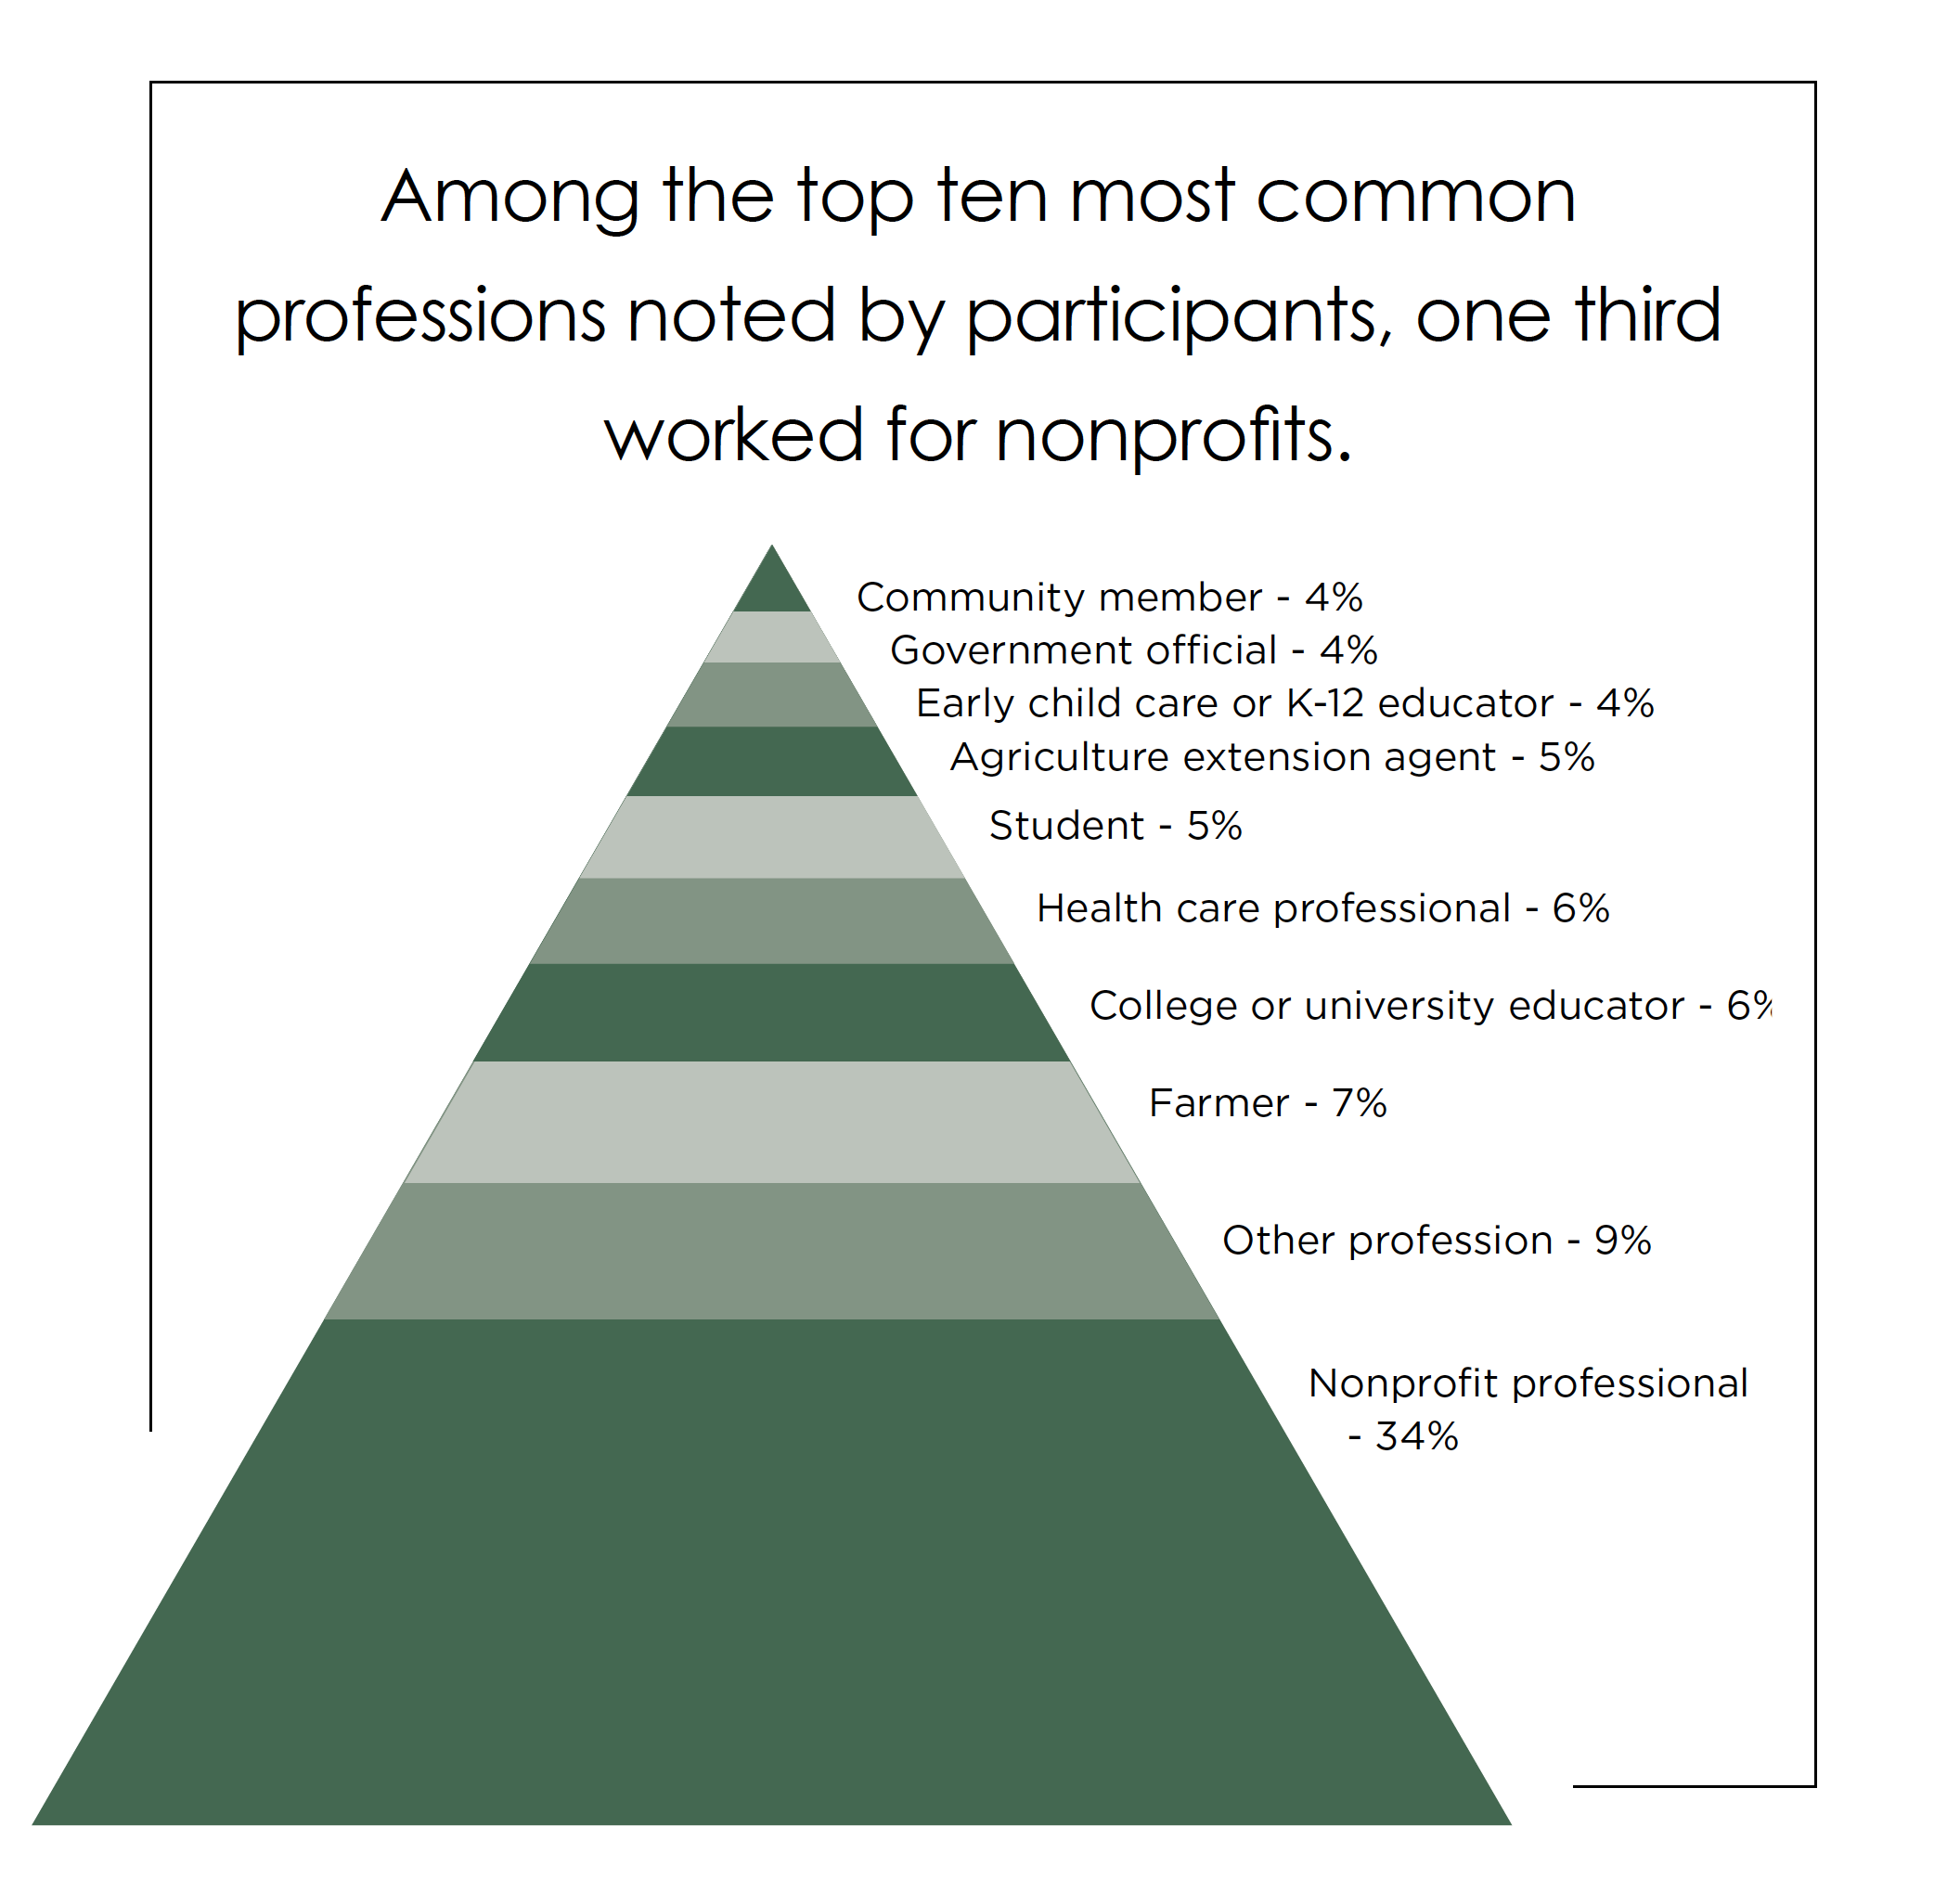 Among the top ten most common professions noted by participants, one third worked for nonprofits.